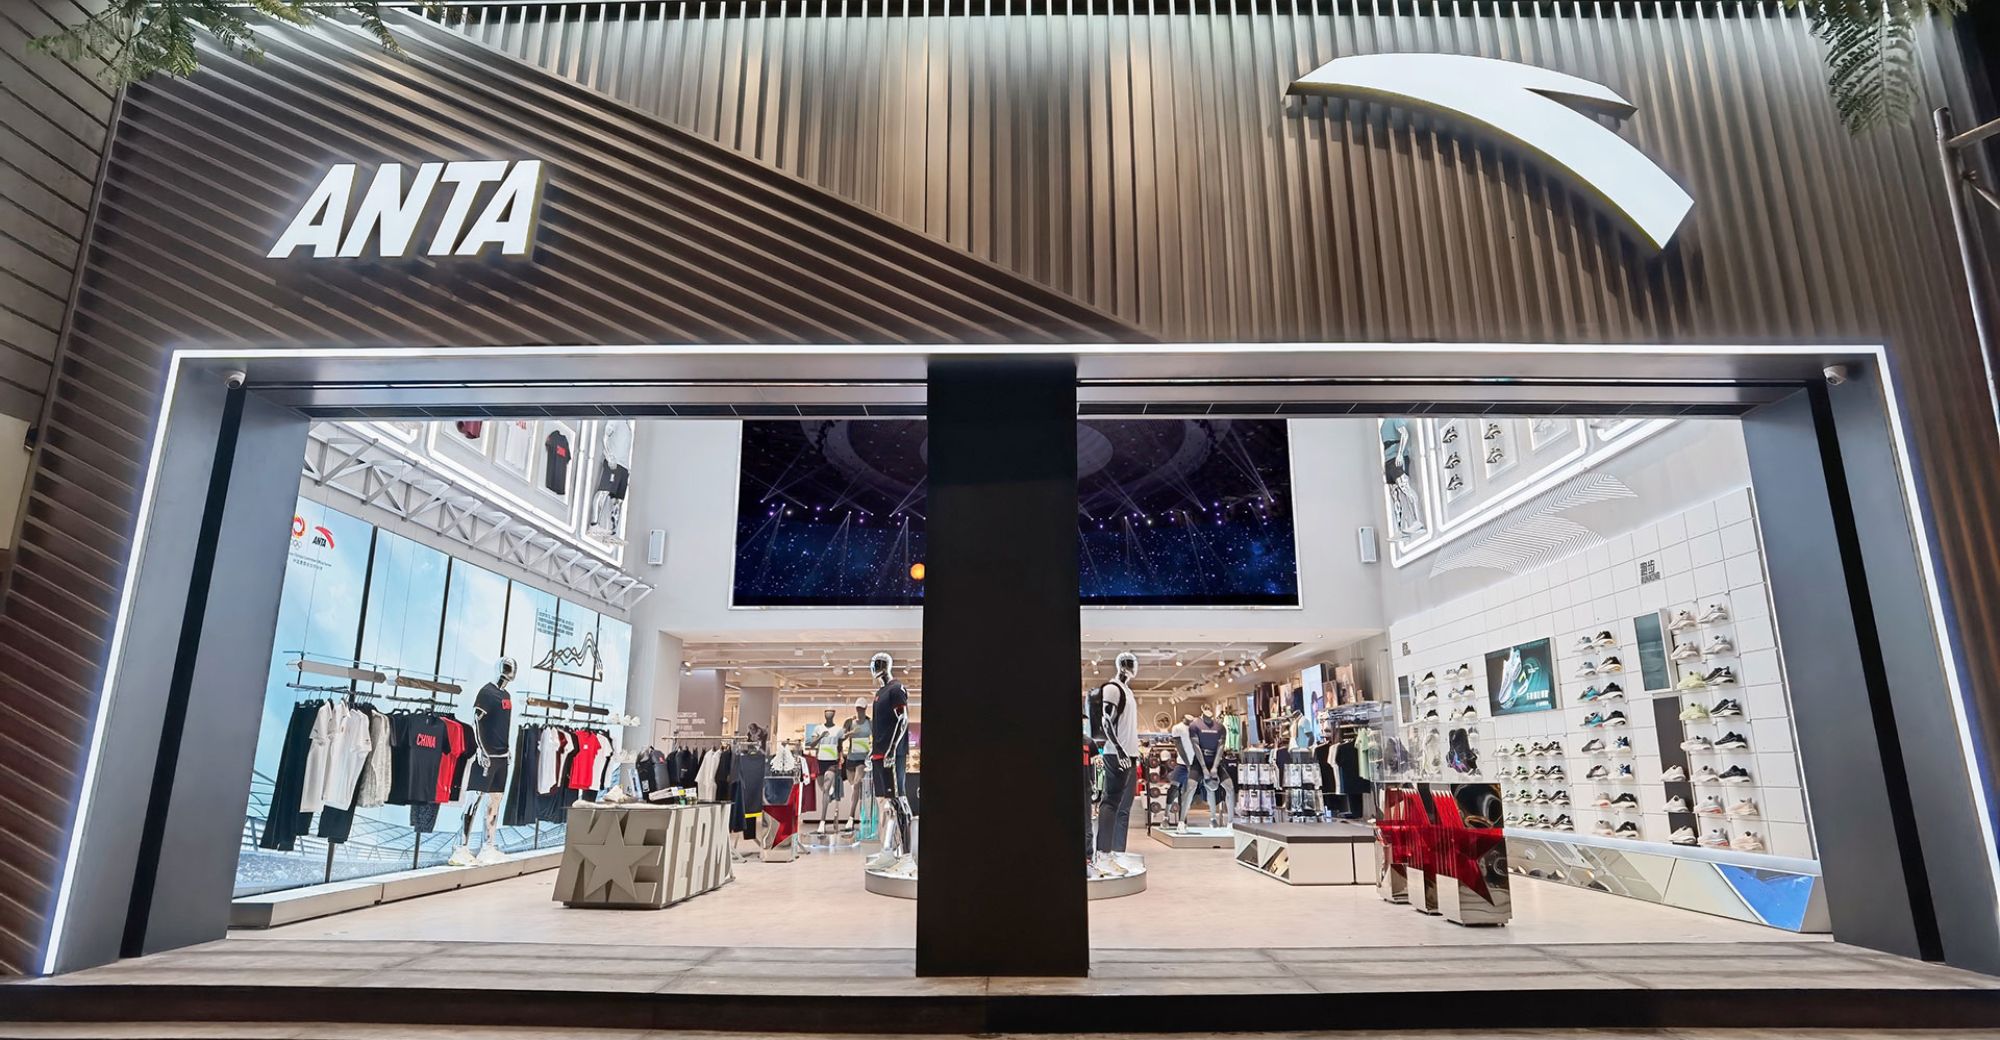 Anta’s H1 Revenue Surpasses Nike in China for First Time